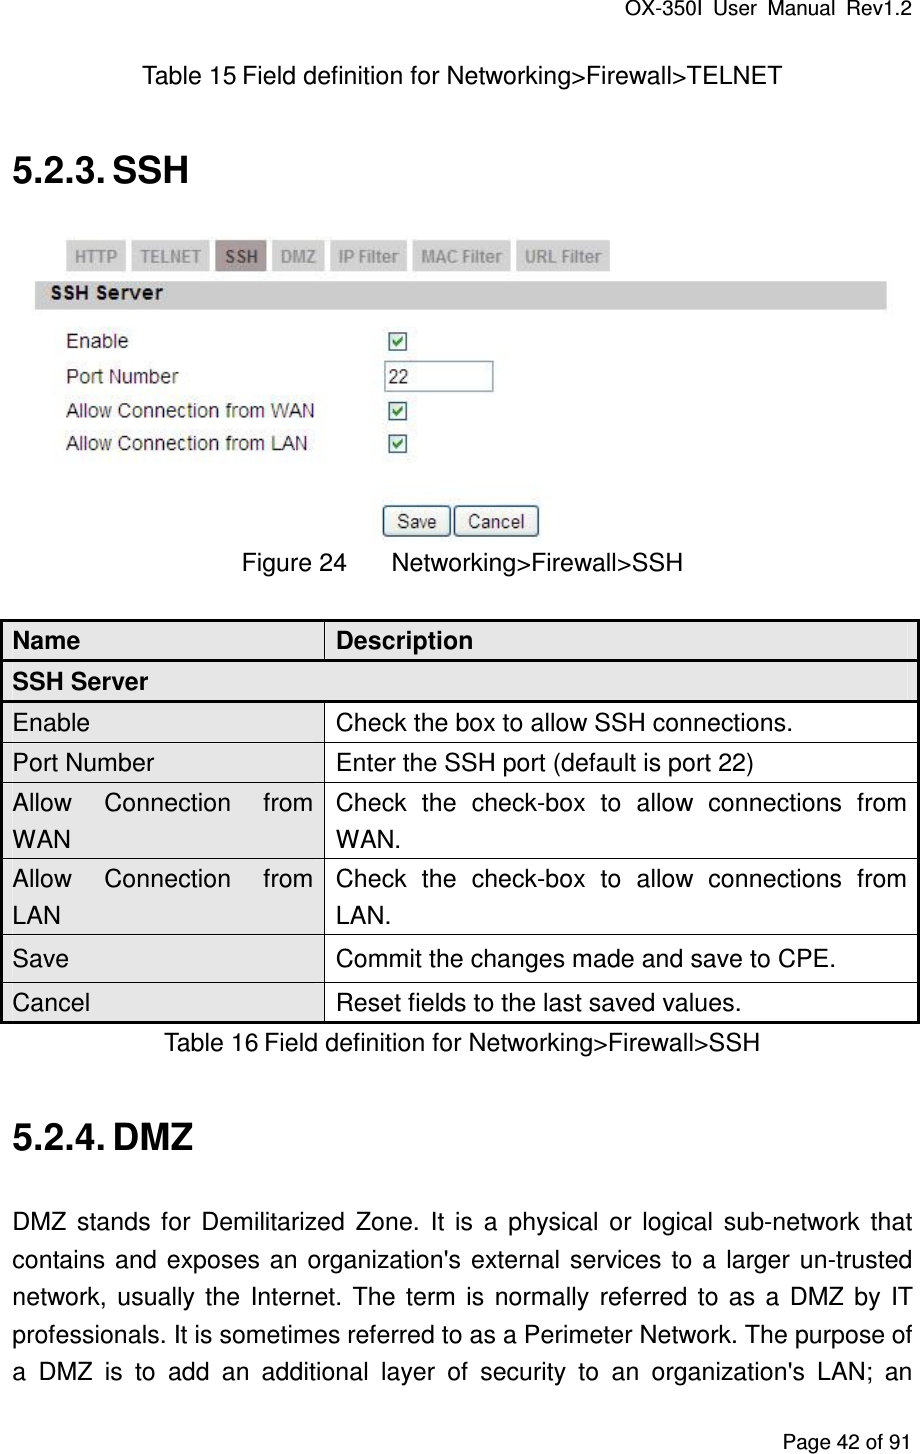 OX-350I  User  Manual  Rev1.2 Page 42 of 91 Table 15 Field definition for Networking&gt;Firewall&gt;TELNET 5.2.3. SSH  Figure 24  Networking&gt;Firewall&gt;SSH Name  Description SSH Server Enable    Check the box to allow SSH connections. Port Number  Enter the SSH port (default is port 22) Allow  Connection  from WAN Check  the  check-box  to  allow  connections  from WAN. Allow  Connection  from LAN Check  the  check-box  to  allow  connections  from LAN. Save  Commit the changes made and save to CPE. Cancel  Reset fields to the last saved values. Table 16 Field definition for Networking&gt;Firewall&gt;SSH 5.2.4. DMZ DMZ  stands  for  Demilitarized  Zone.  It  is  a  physical  or  logical  sub-network  that contains and  exposes  an organization&apos;s  external  services  to  a  larger un-trusted network,  usually  the  Internet.  The  term  is  normally  referred  to  as  a  DMZ  by  IT professionals. It is sometimes referred to as a Perimeter Network. The purpose of a  DMZ  is  to  add  an  additional  layer  of  security  to  an  organization&apos;s  LAN;  an 